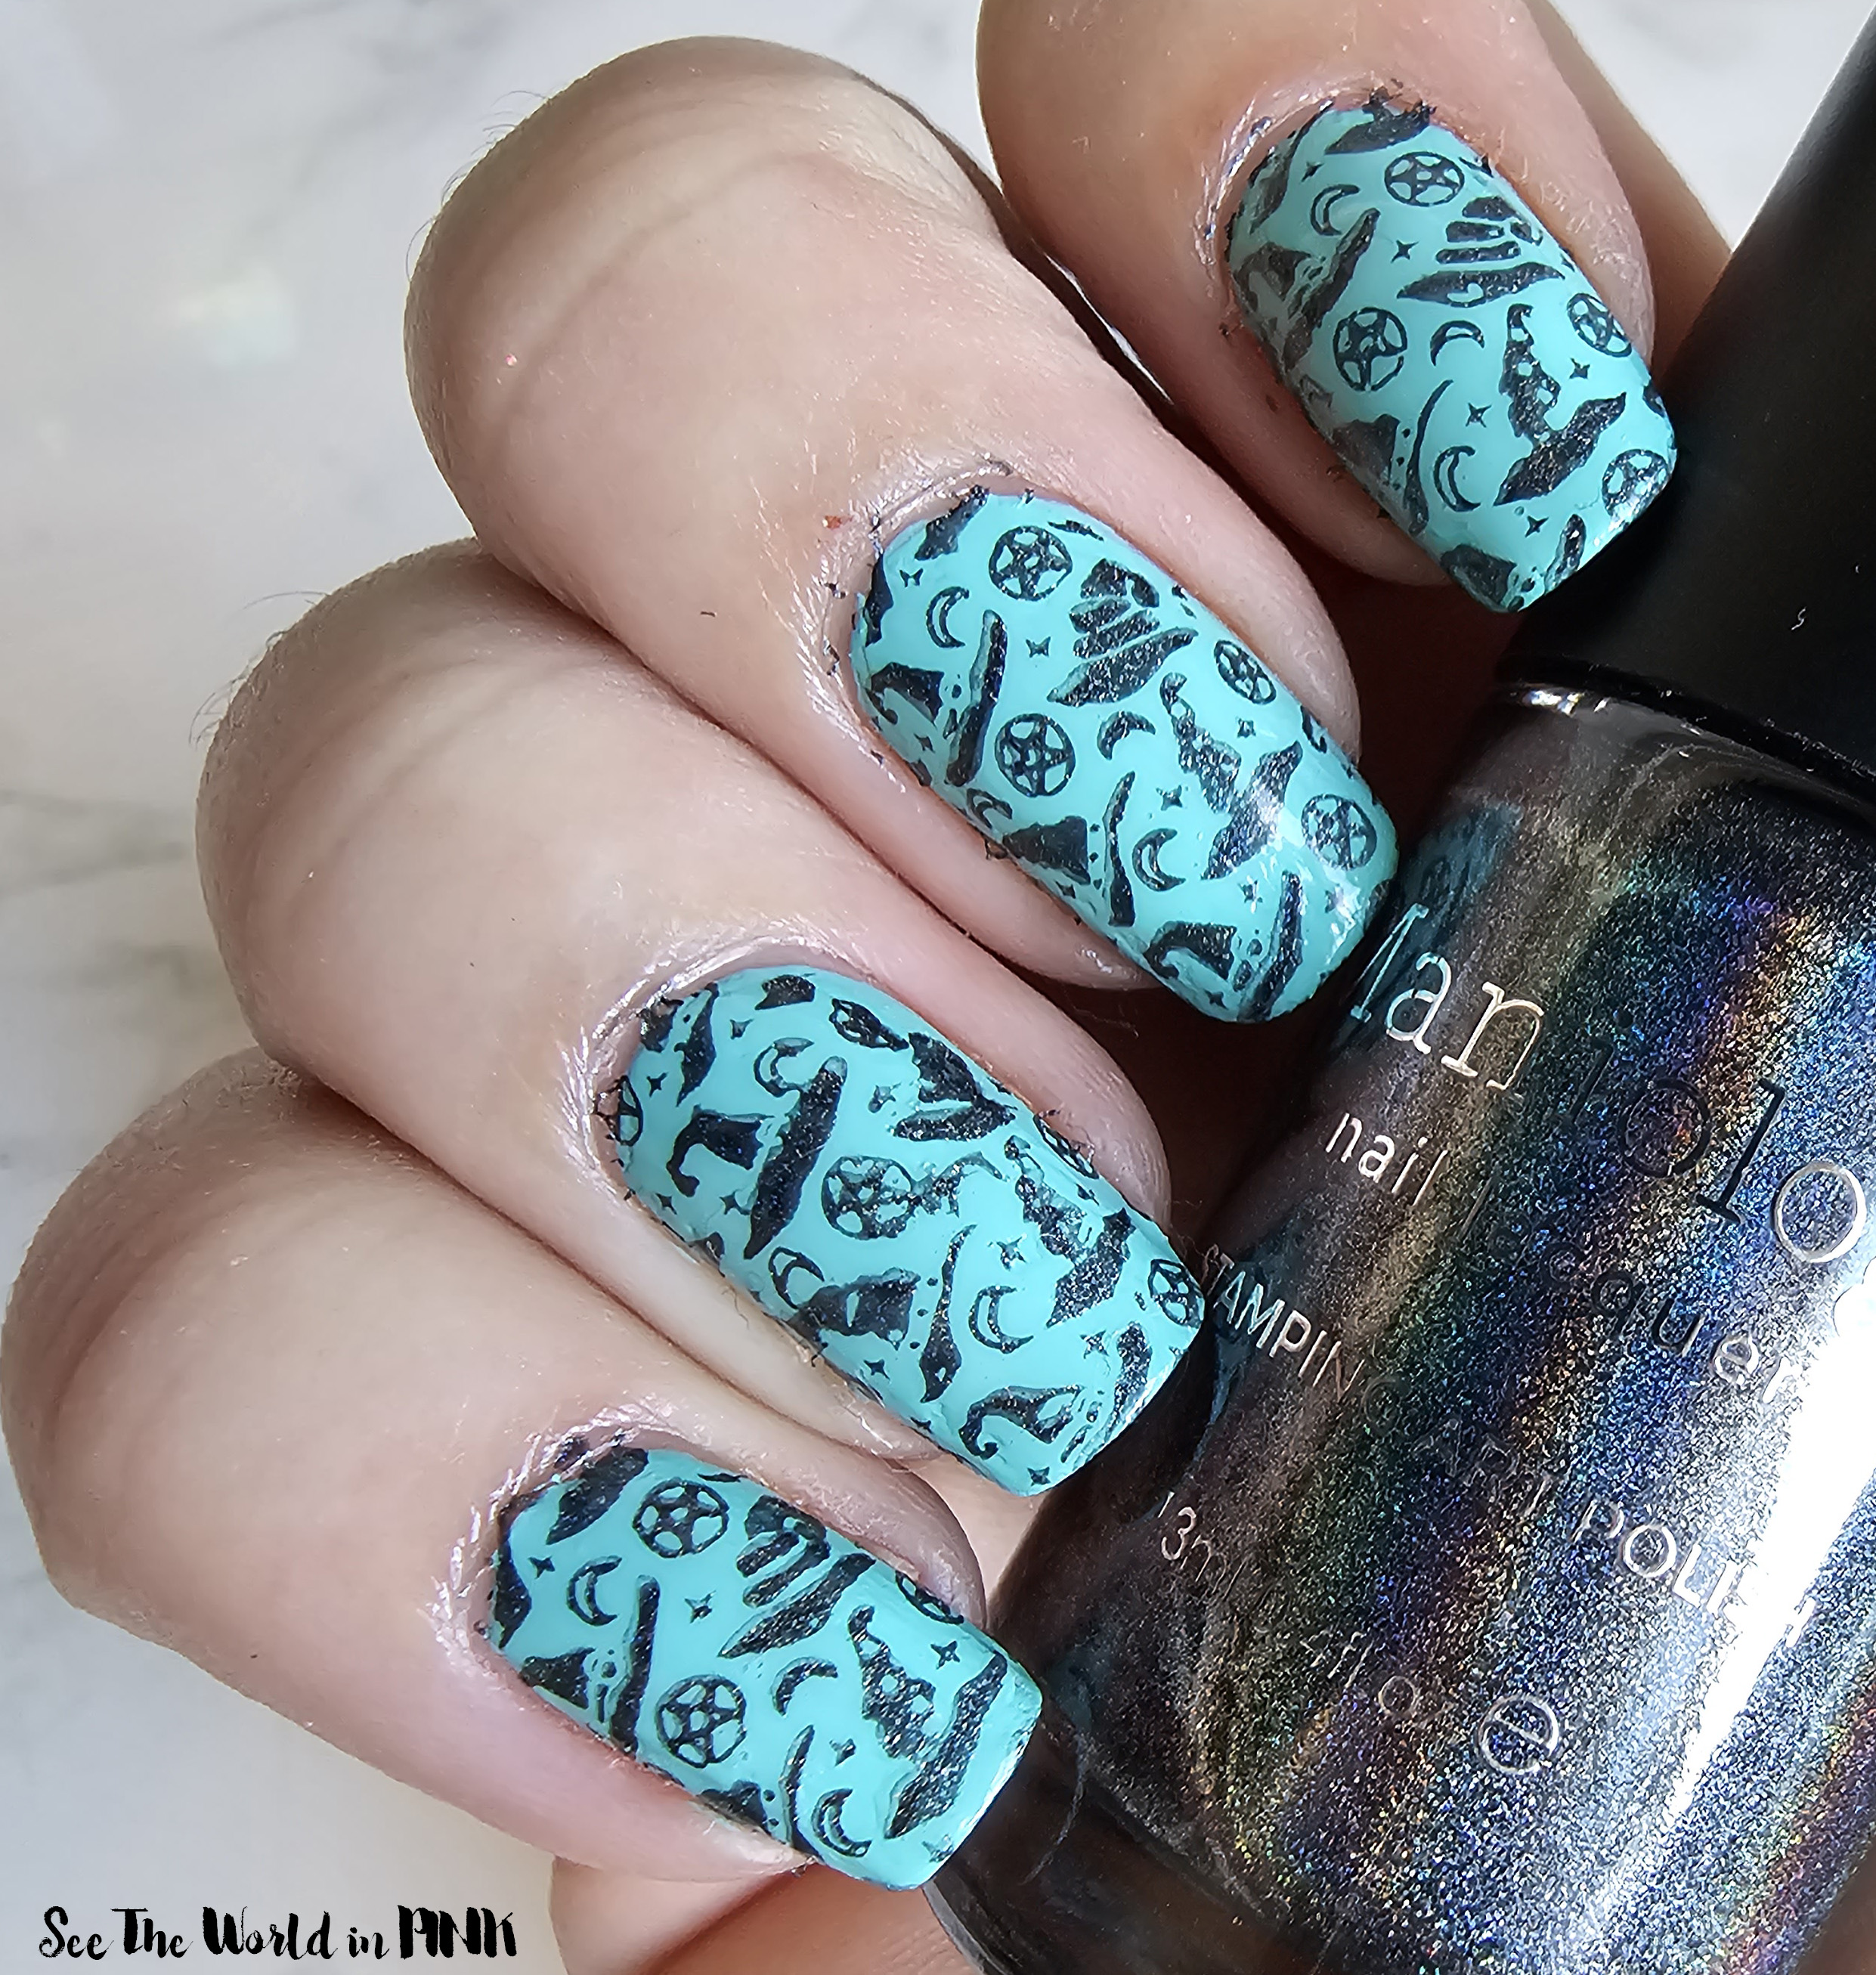 Manicure Monday - Stamped Witch Hat Nails